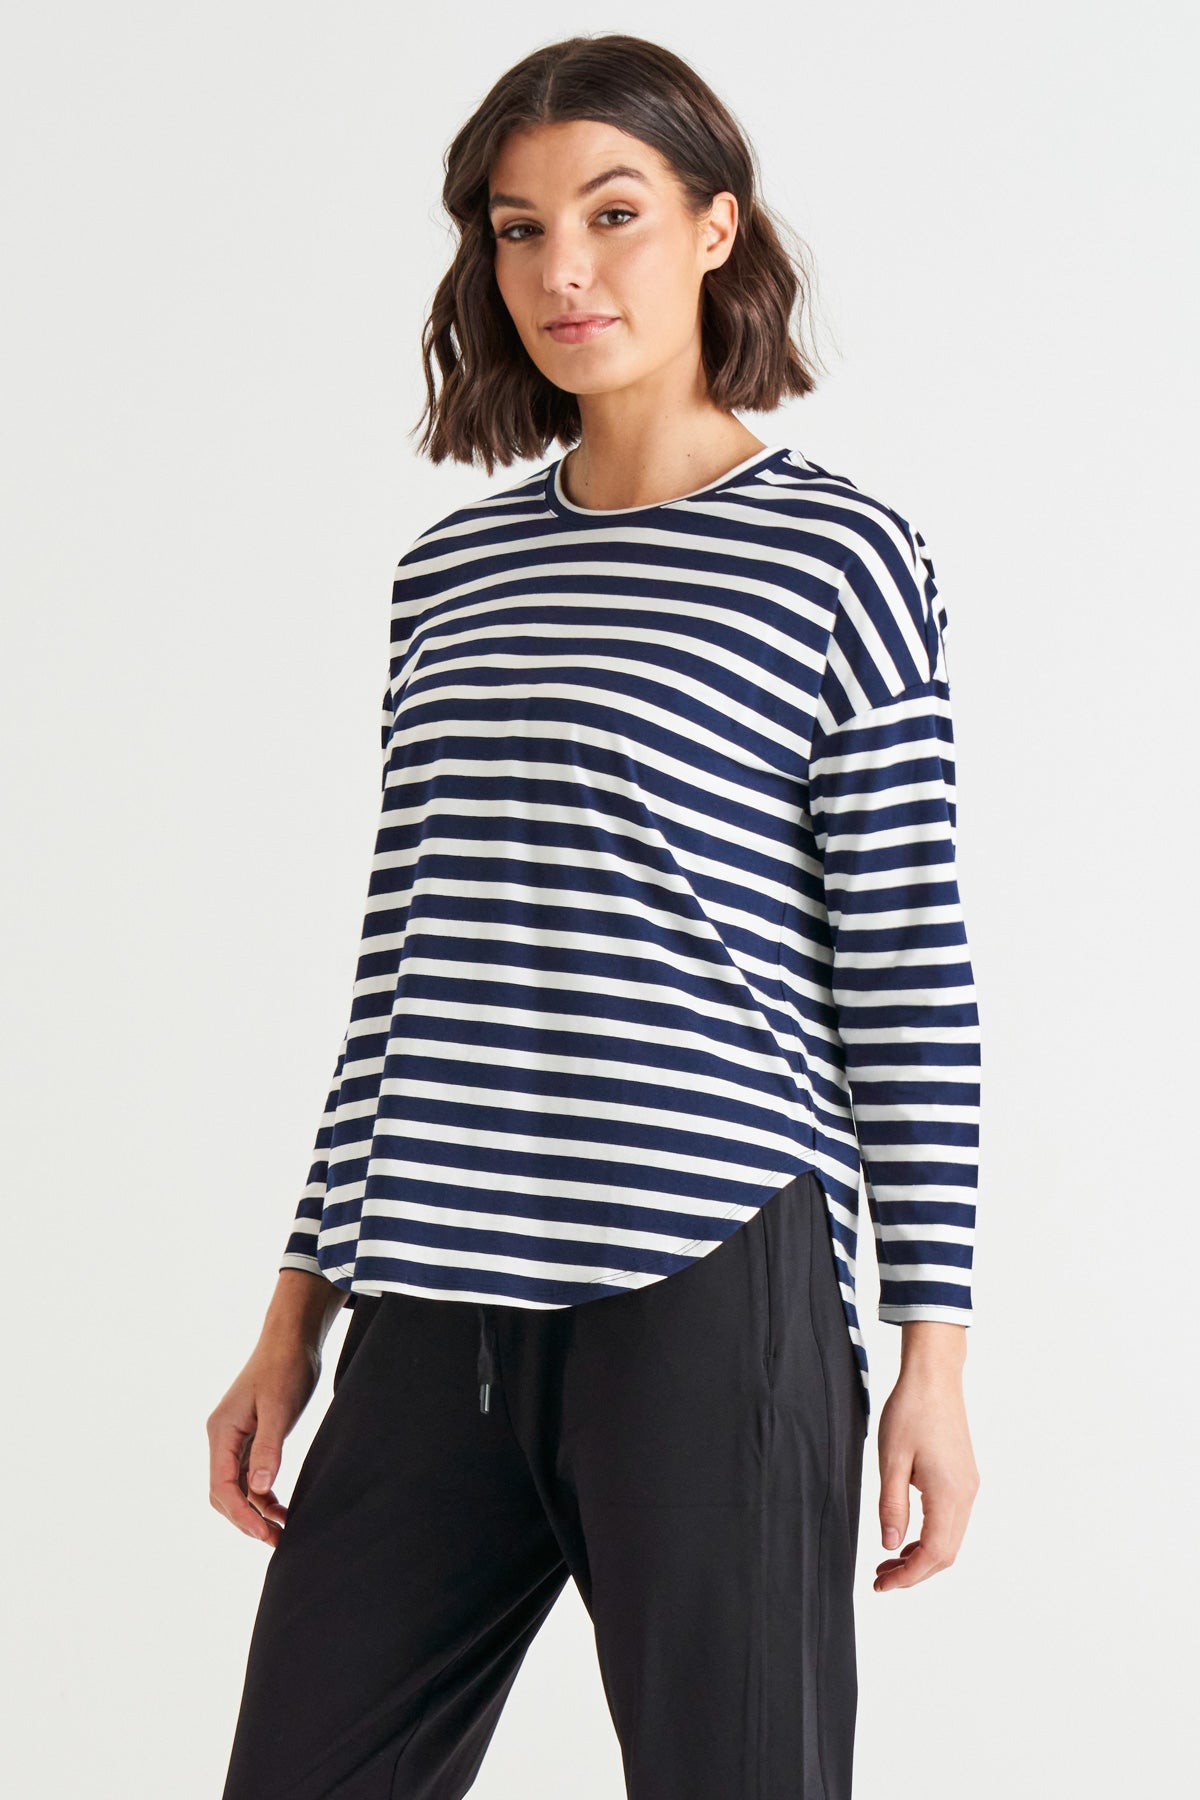 Jessie Relaxed Long Sleeve Cotton Basic Tee - Blue Stripe